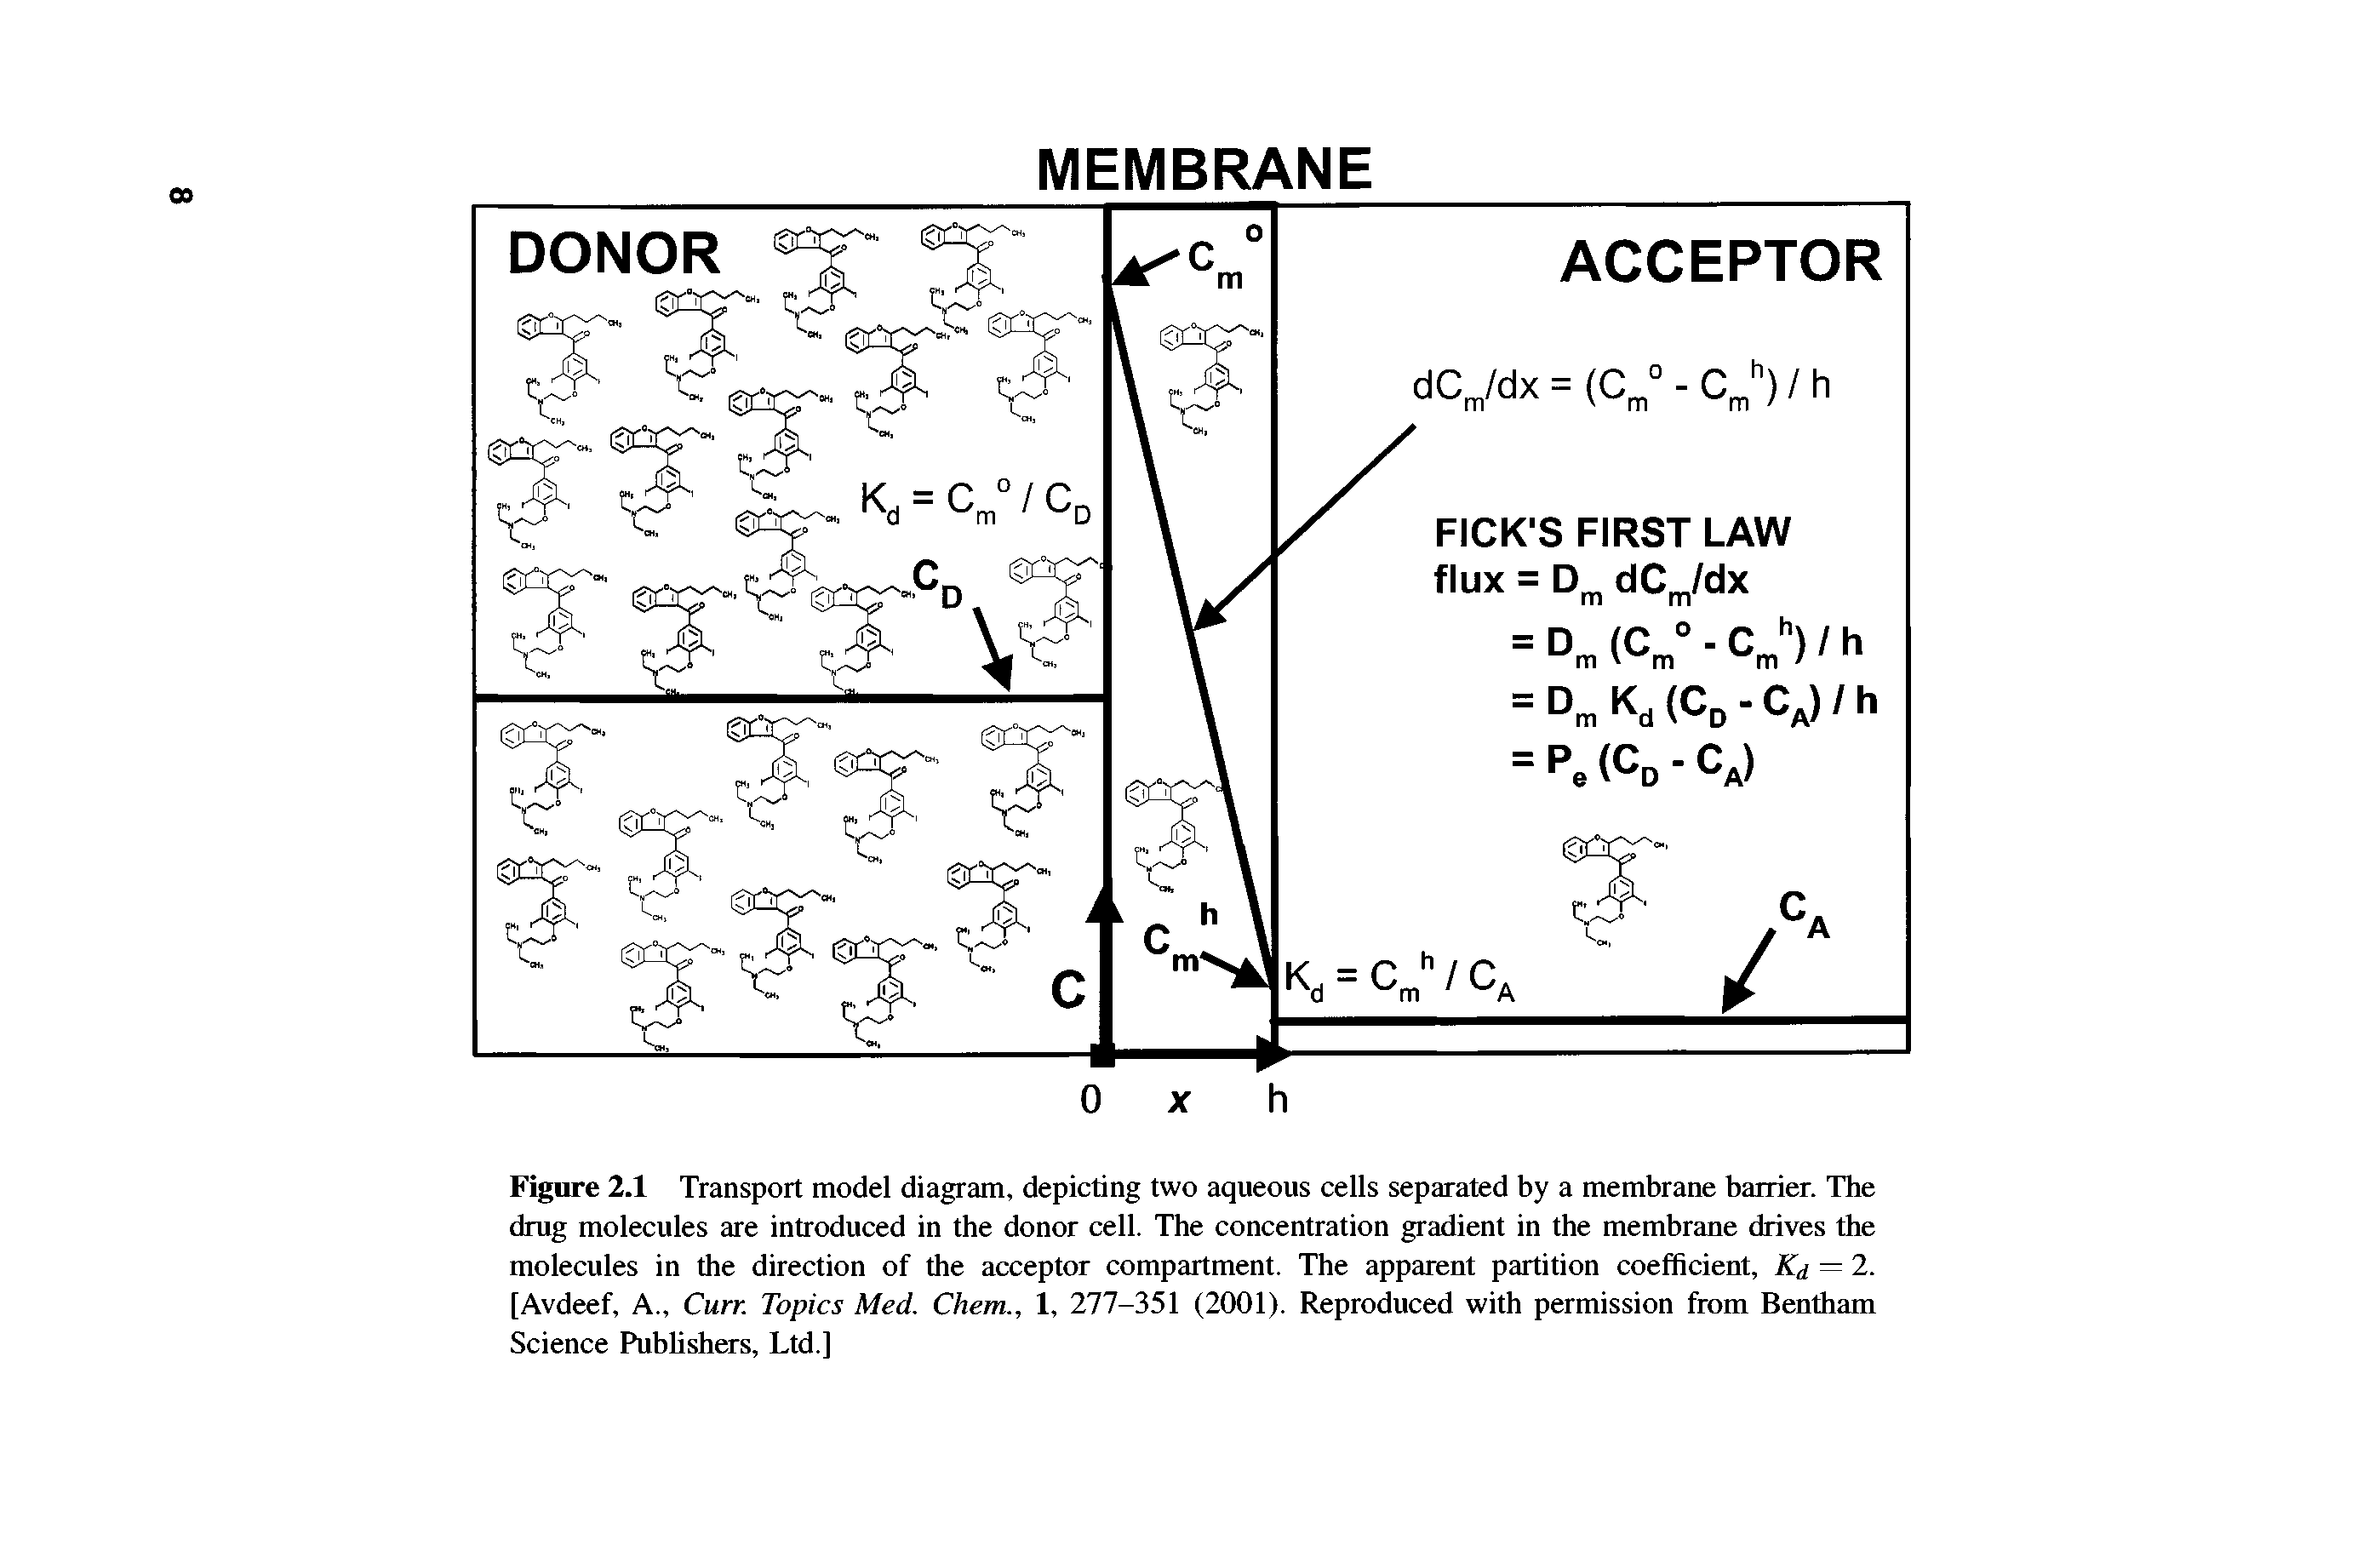 Figure 2.1 Transport model diagram, depicting two aqueous cells separated by a membrane barrier. The drug molecules are introduced in the donor cell. The concentration gradient in the membrane drives the molecules in the direction of the acceptor compartment. The apparent partition coefficient, Kd = 2. [Avdeef, A., Curr. Topics Med. Chem., 1, 277-351 (2001). Reproduced with permission from Bentham Science Publishers, Ltd.]...